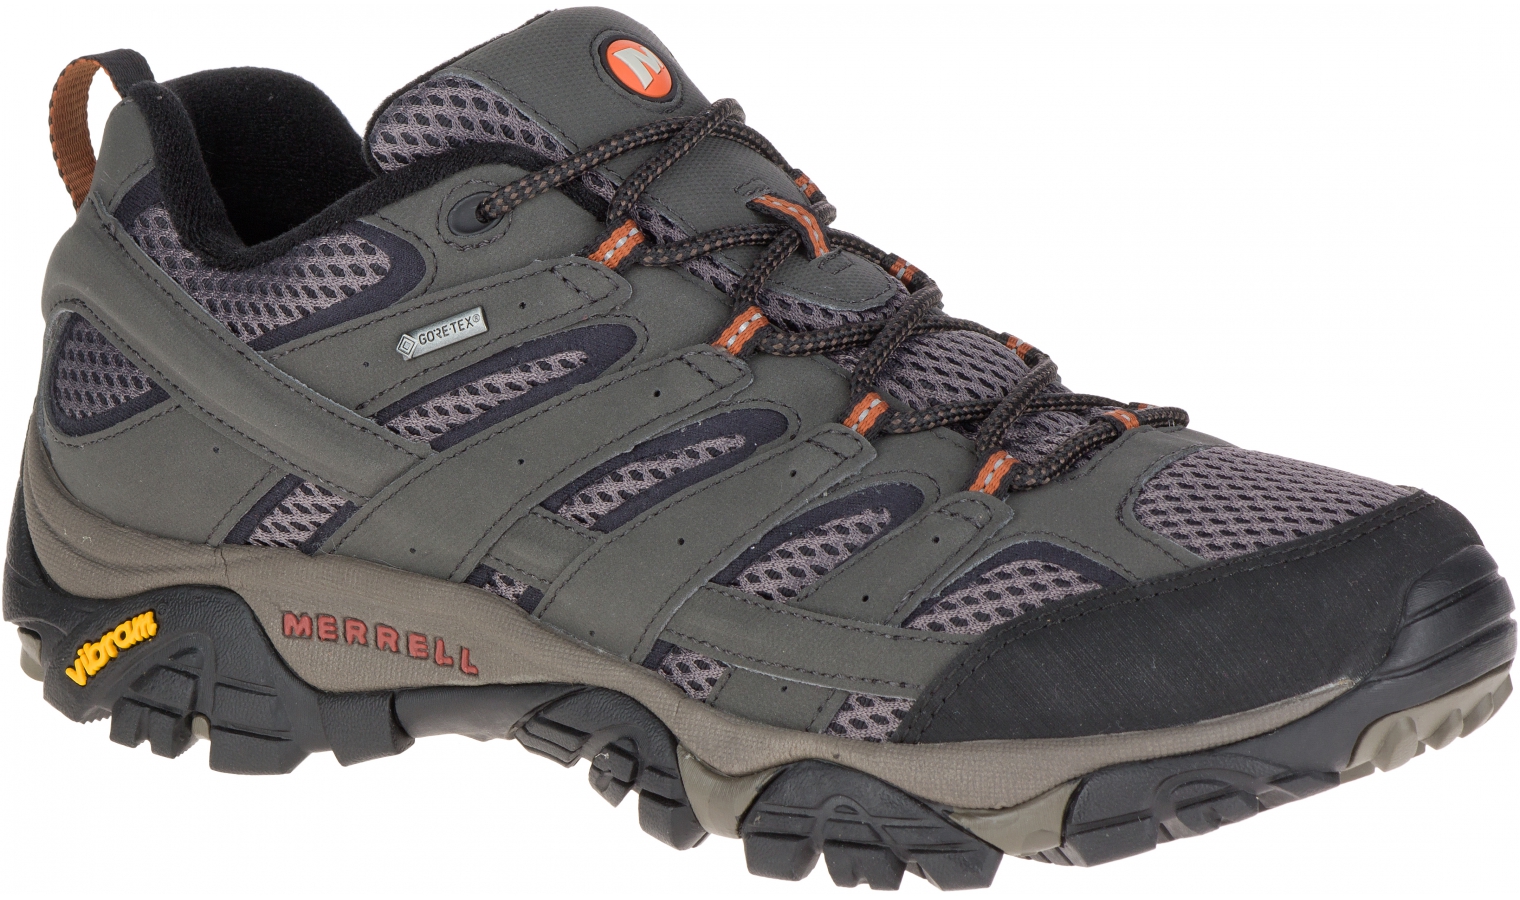 Mens outdoor shoes Merrell MOAB 2 GTX | AD Sport.store